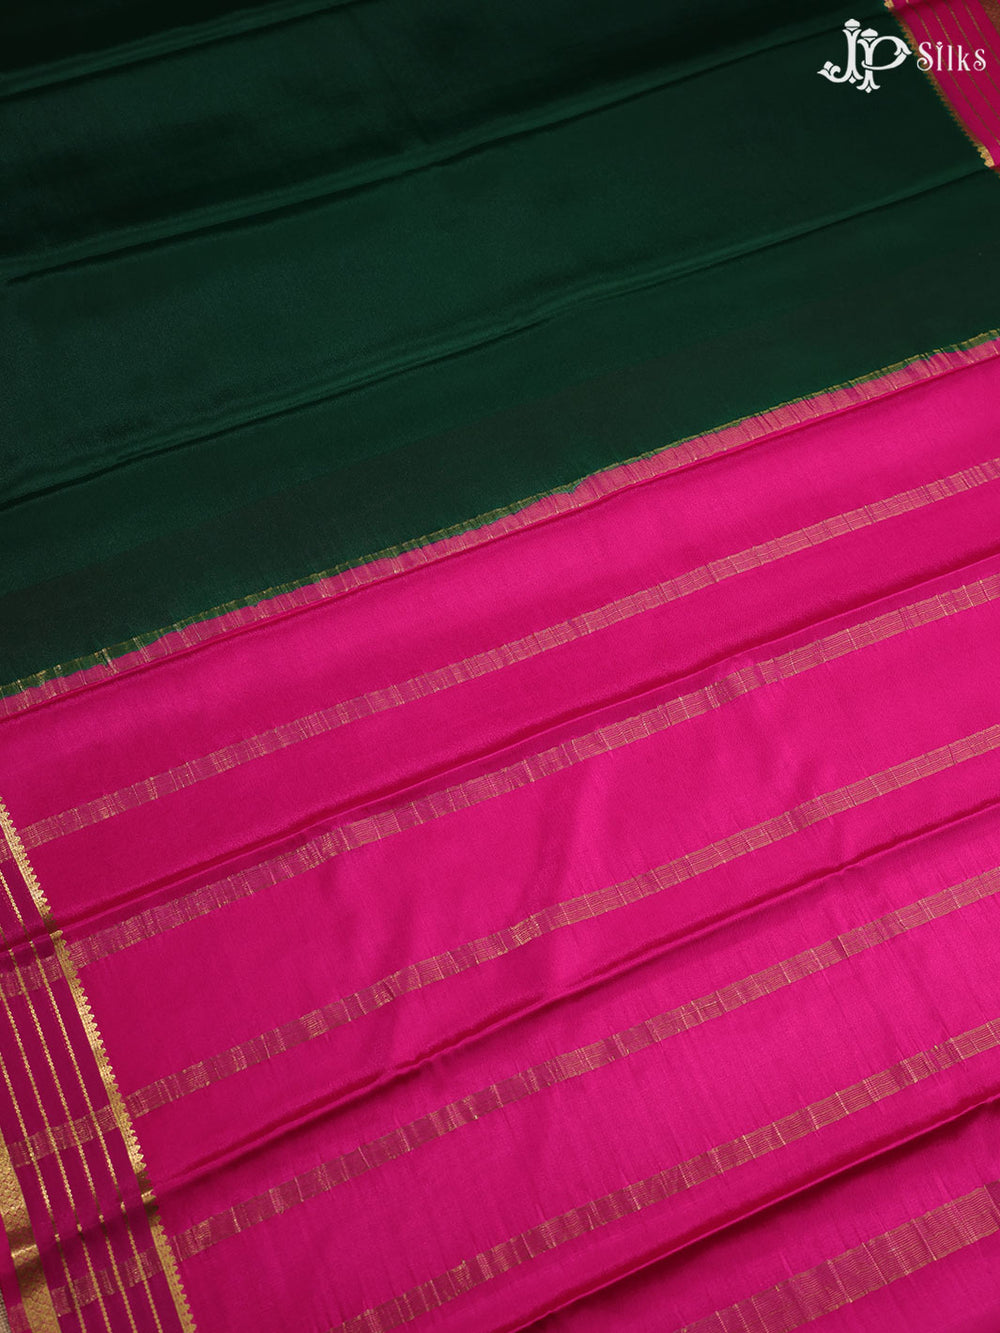 Bottle green and Rani pink Mysore Silk Saree - A6320 - View 1